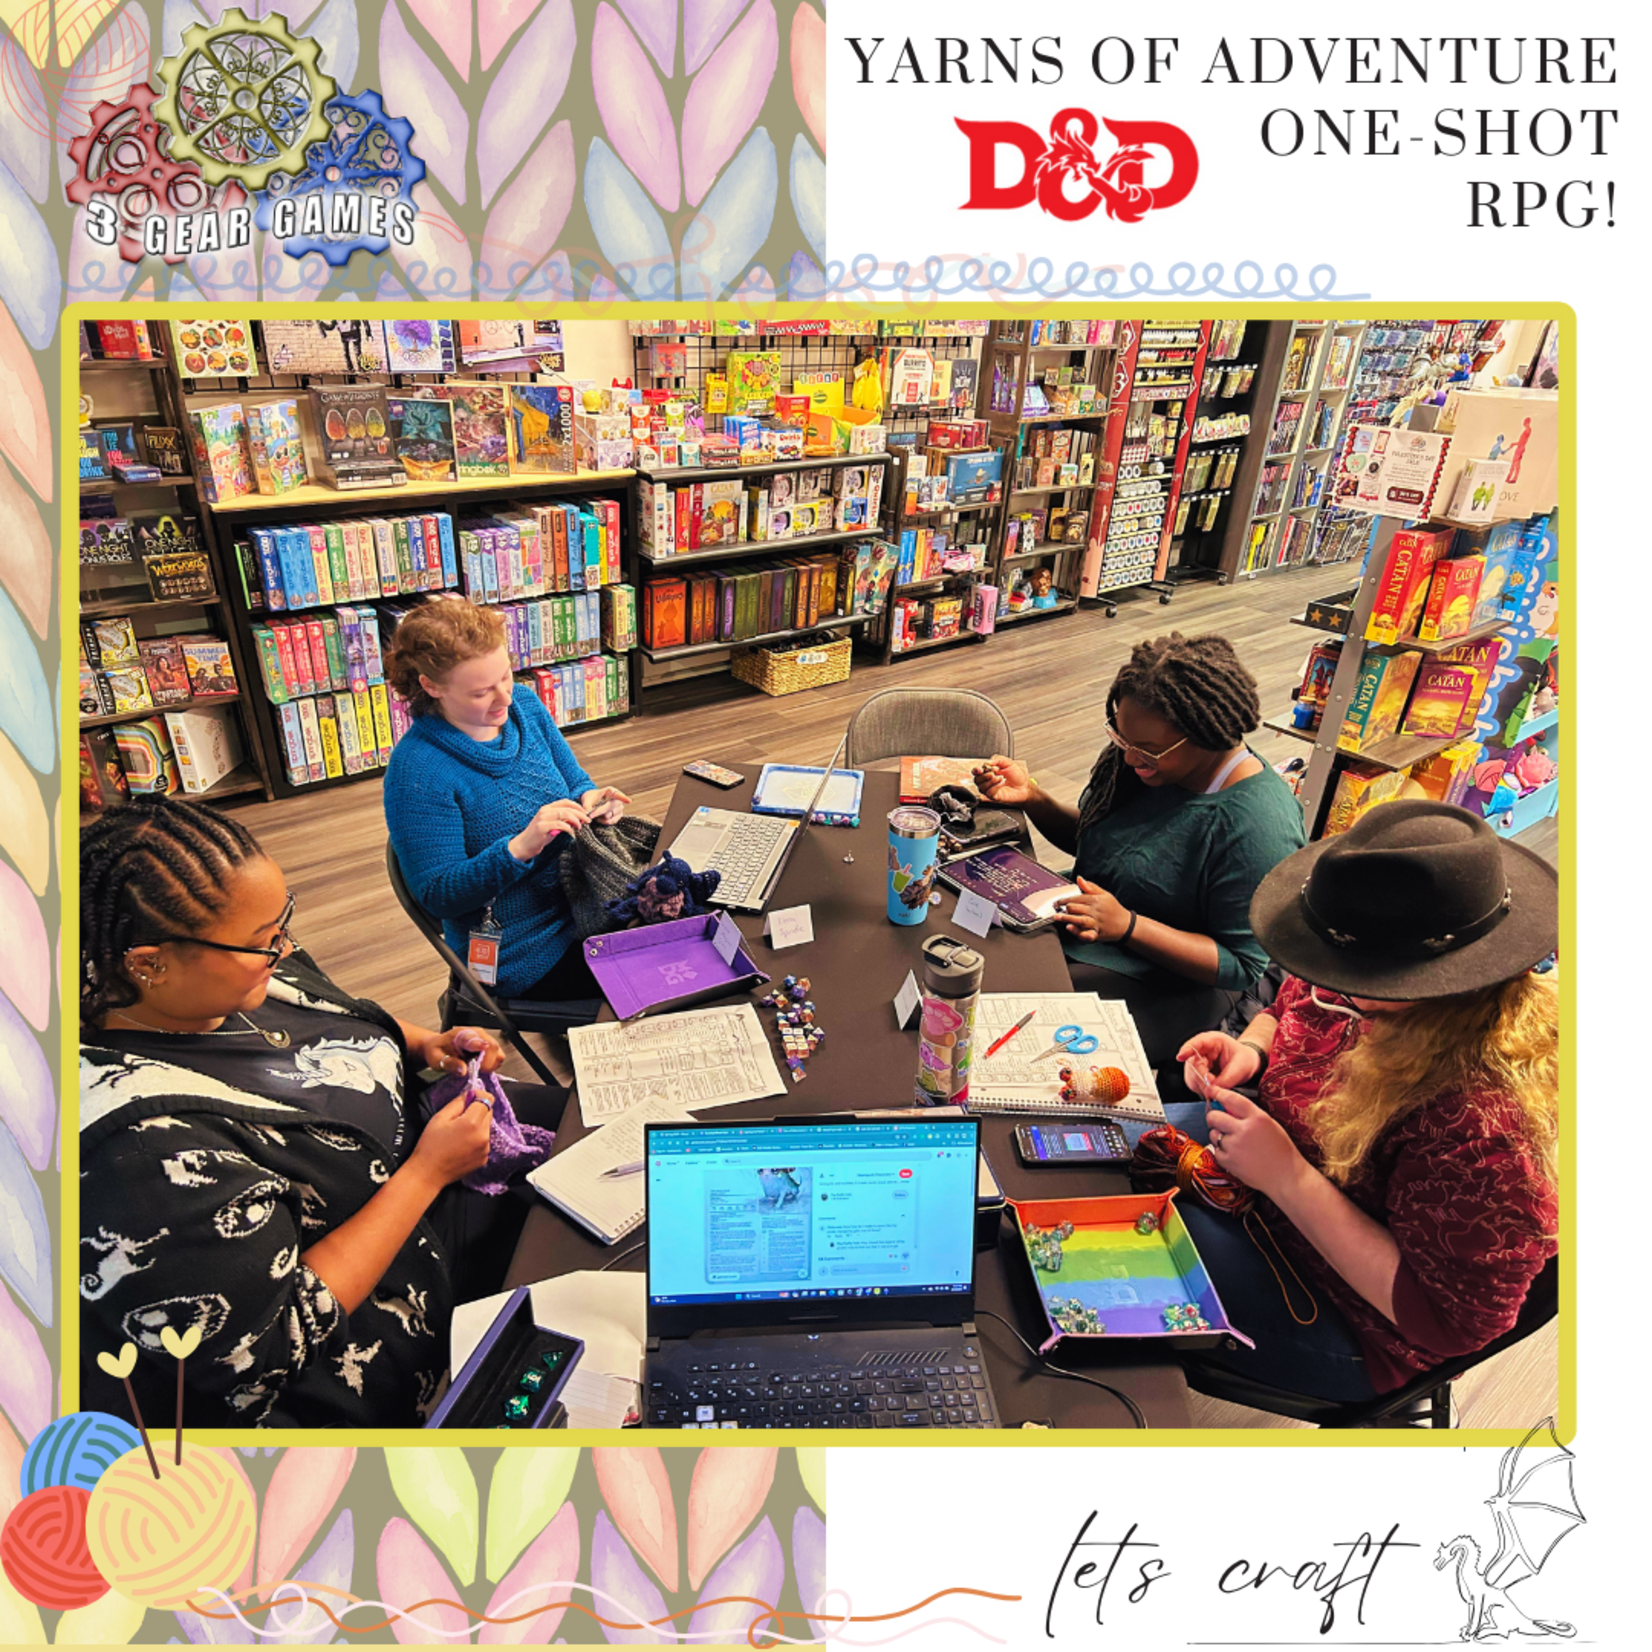 Dungeons of Dragons One-Shot RPG: Yarns Of Adventure